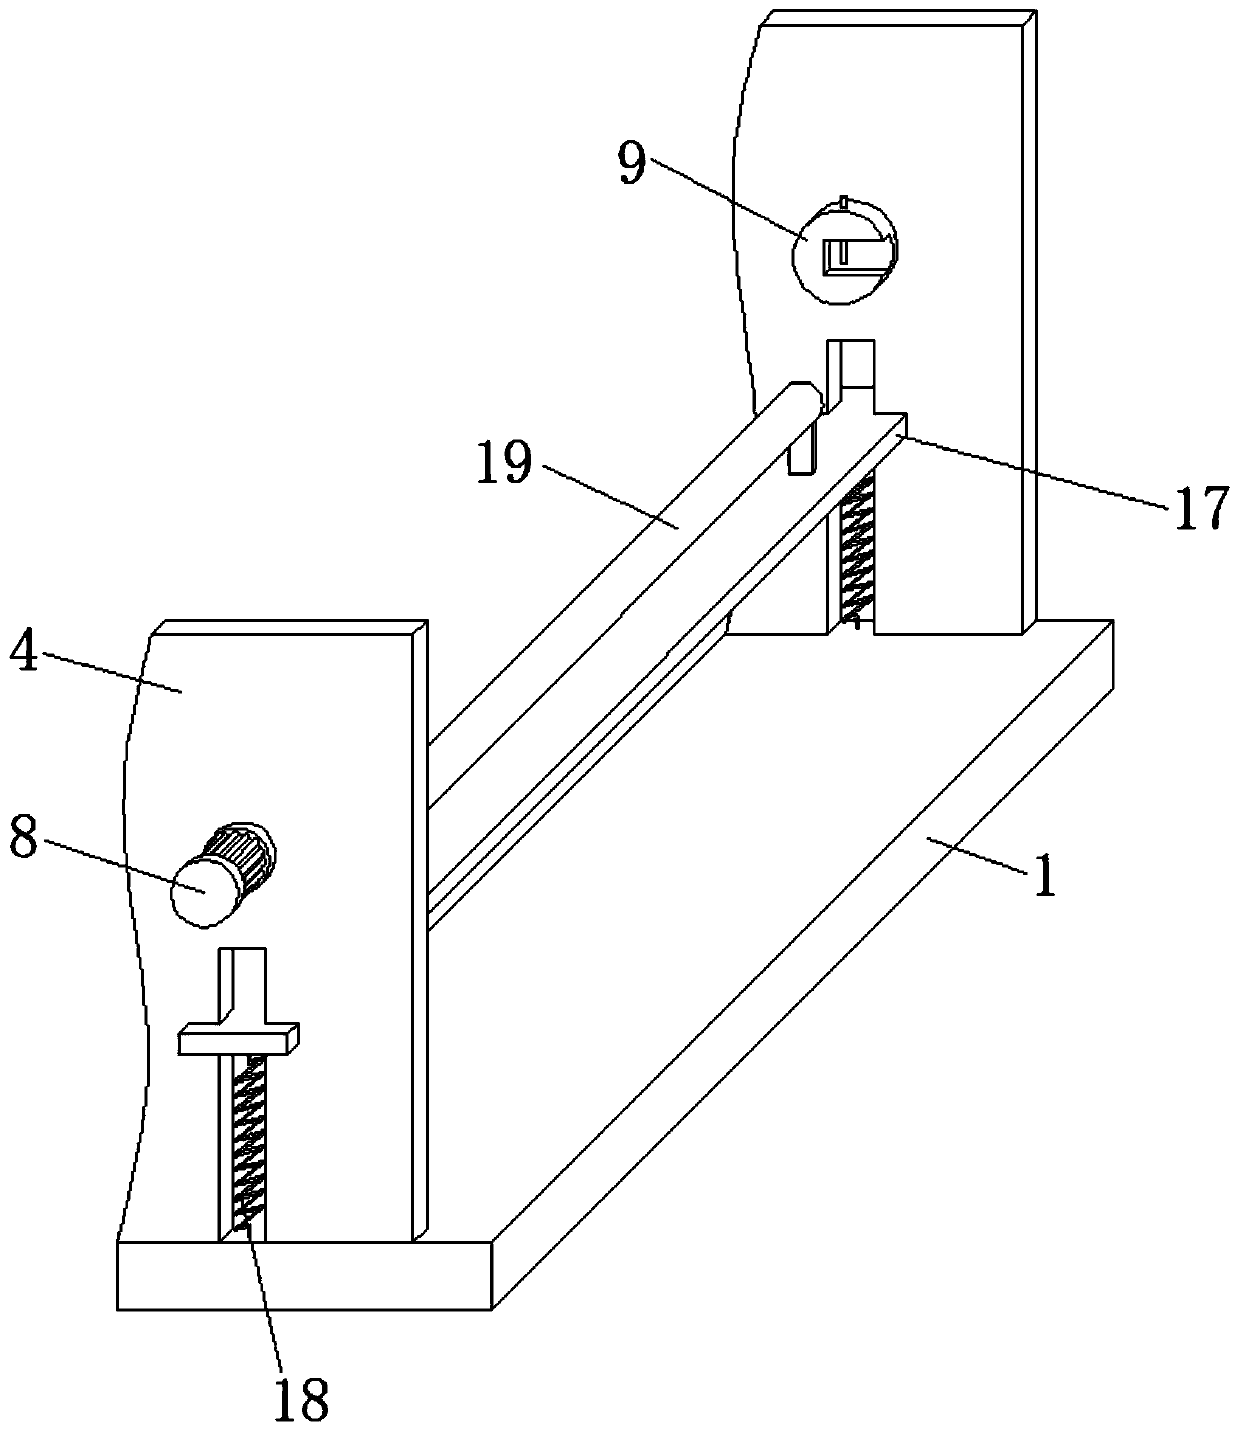 Cloth winding device for garment making